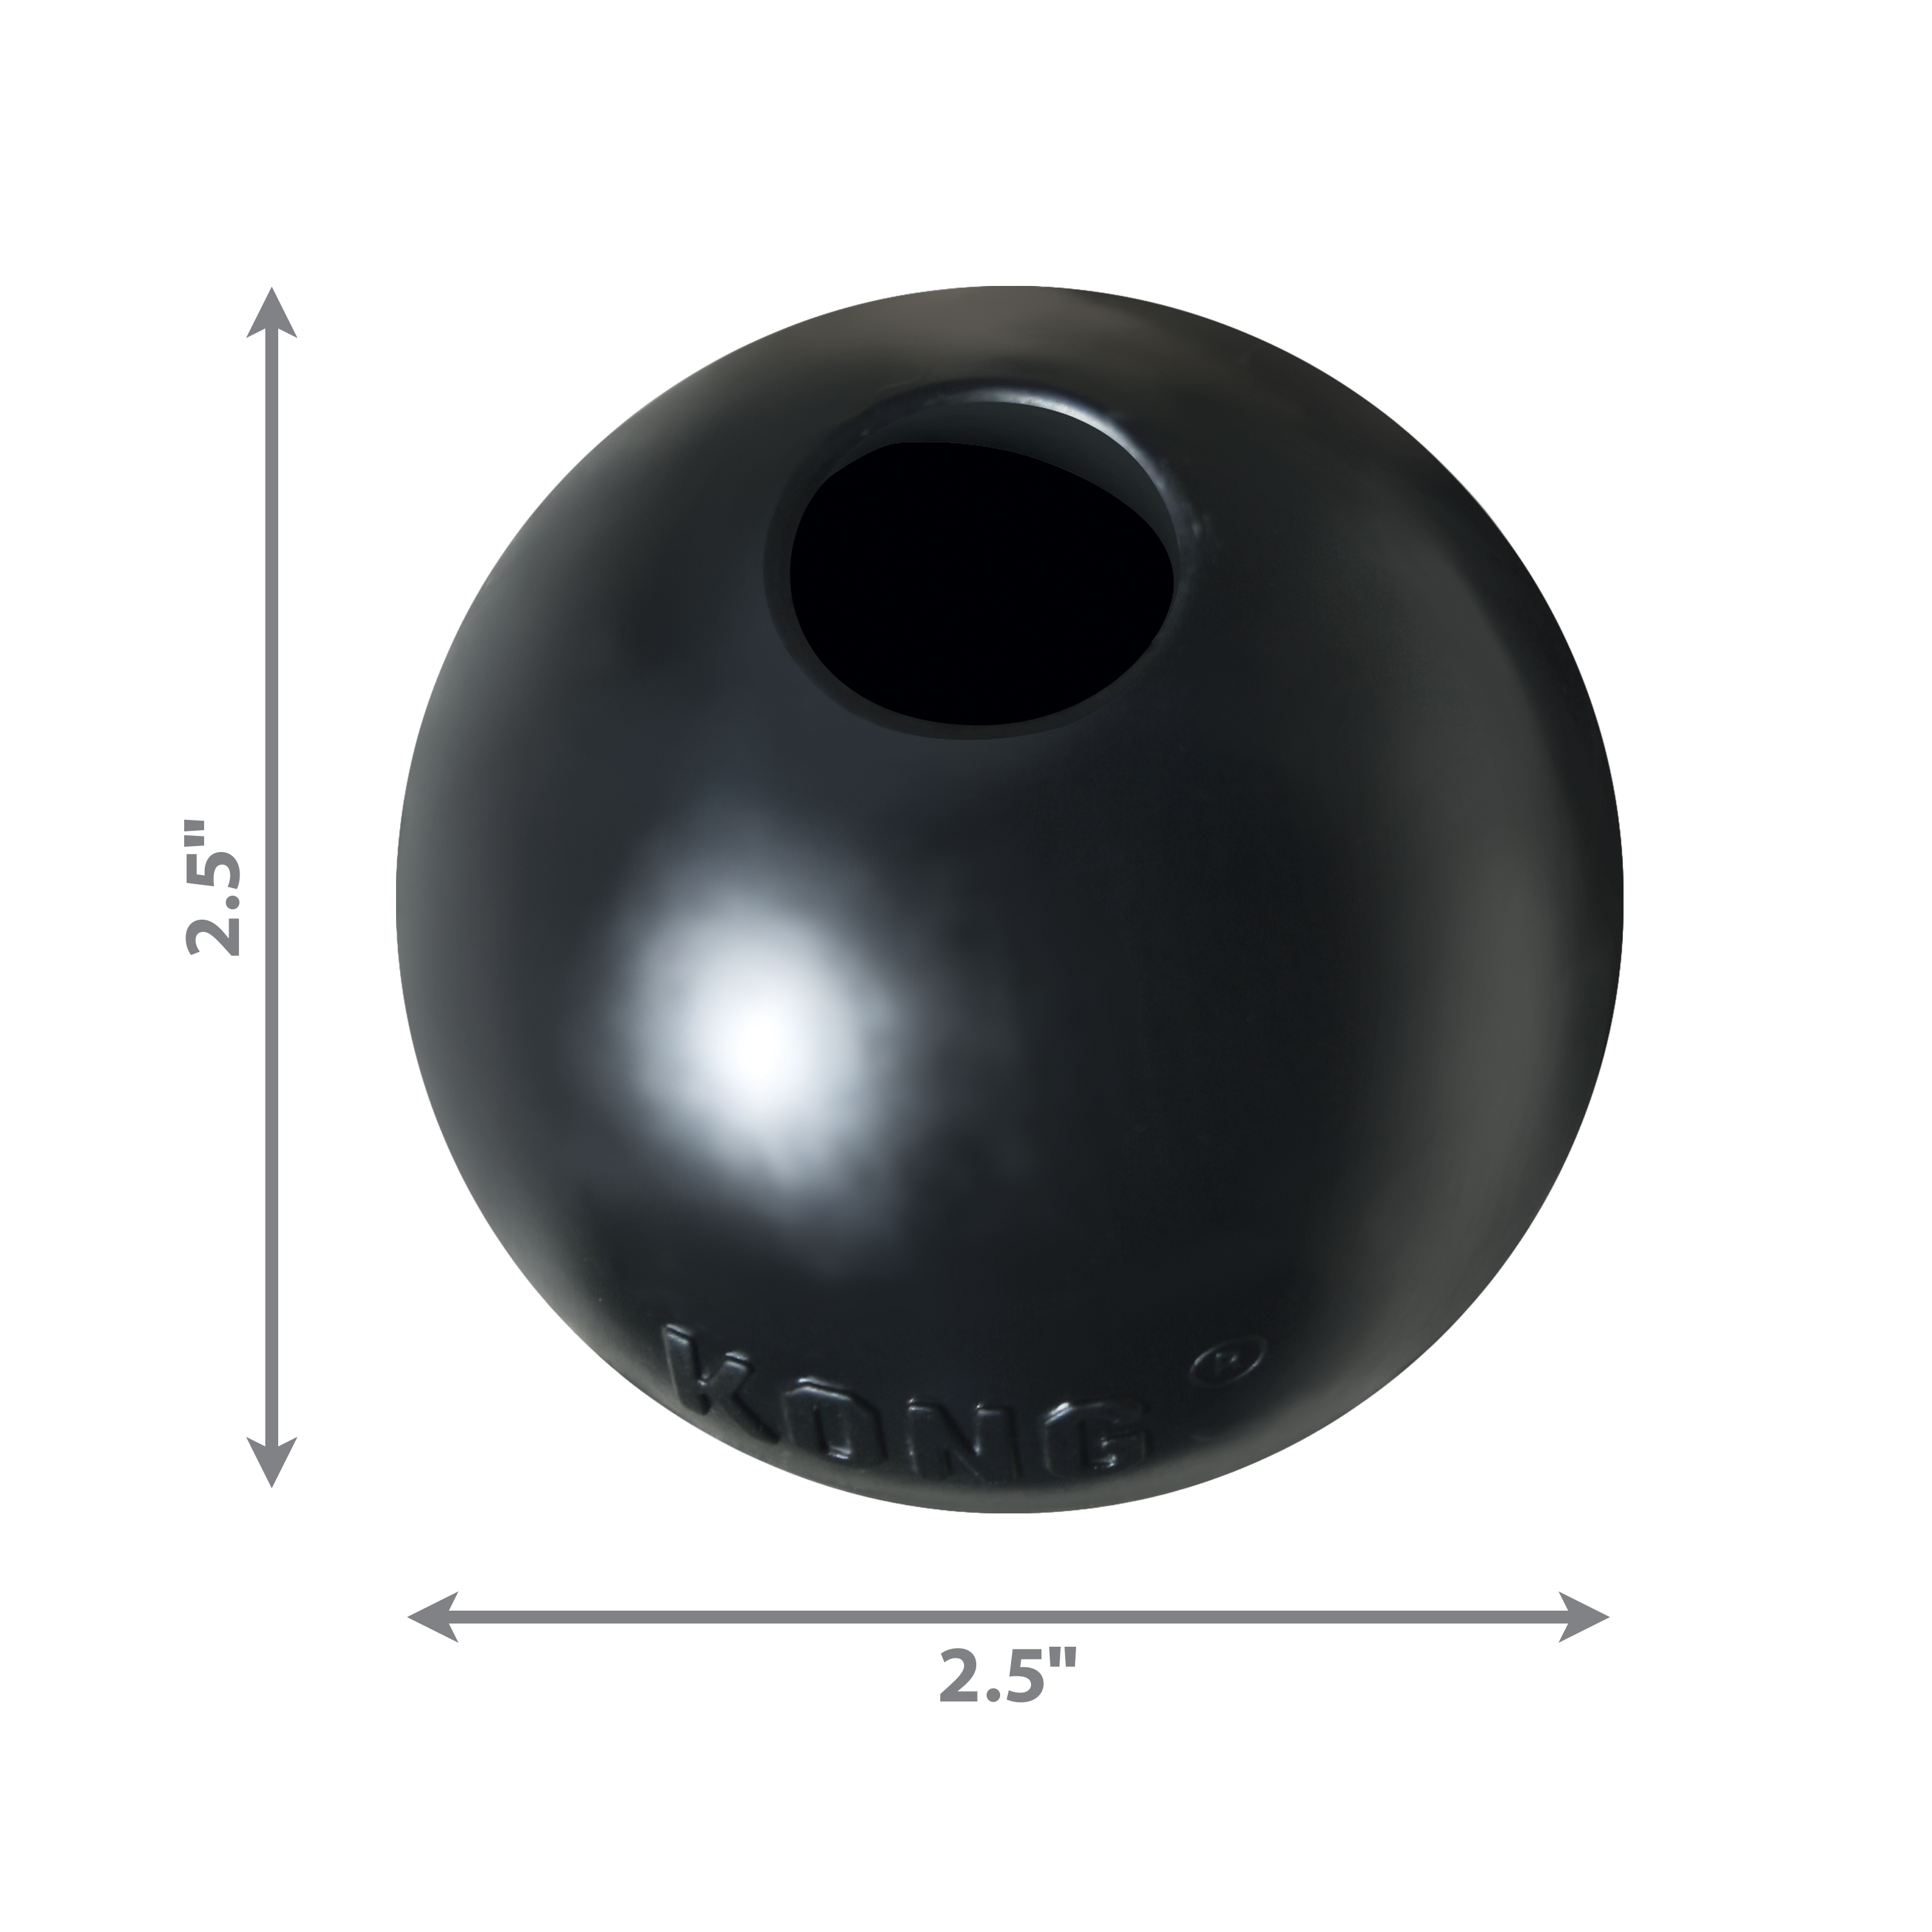 KONG Extreme Ball dimoffpack product image